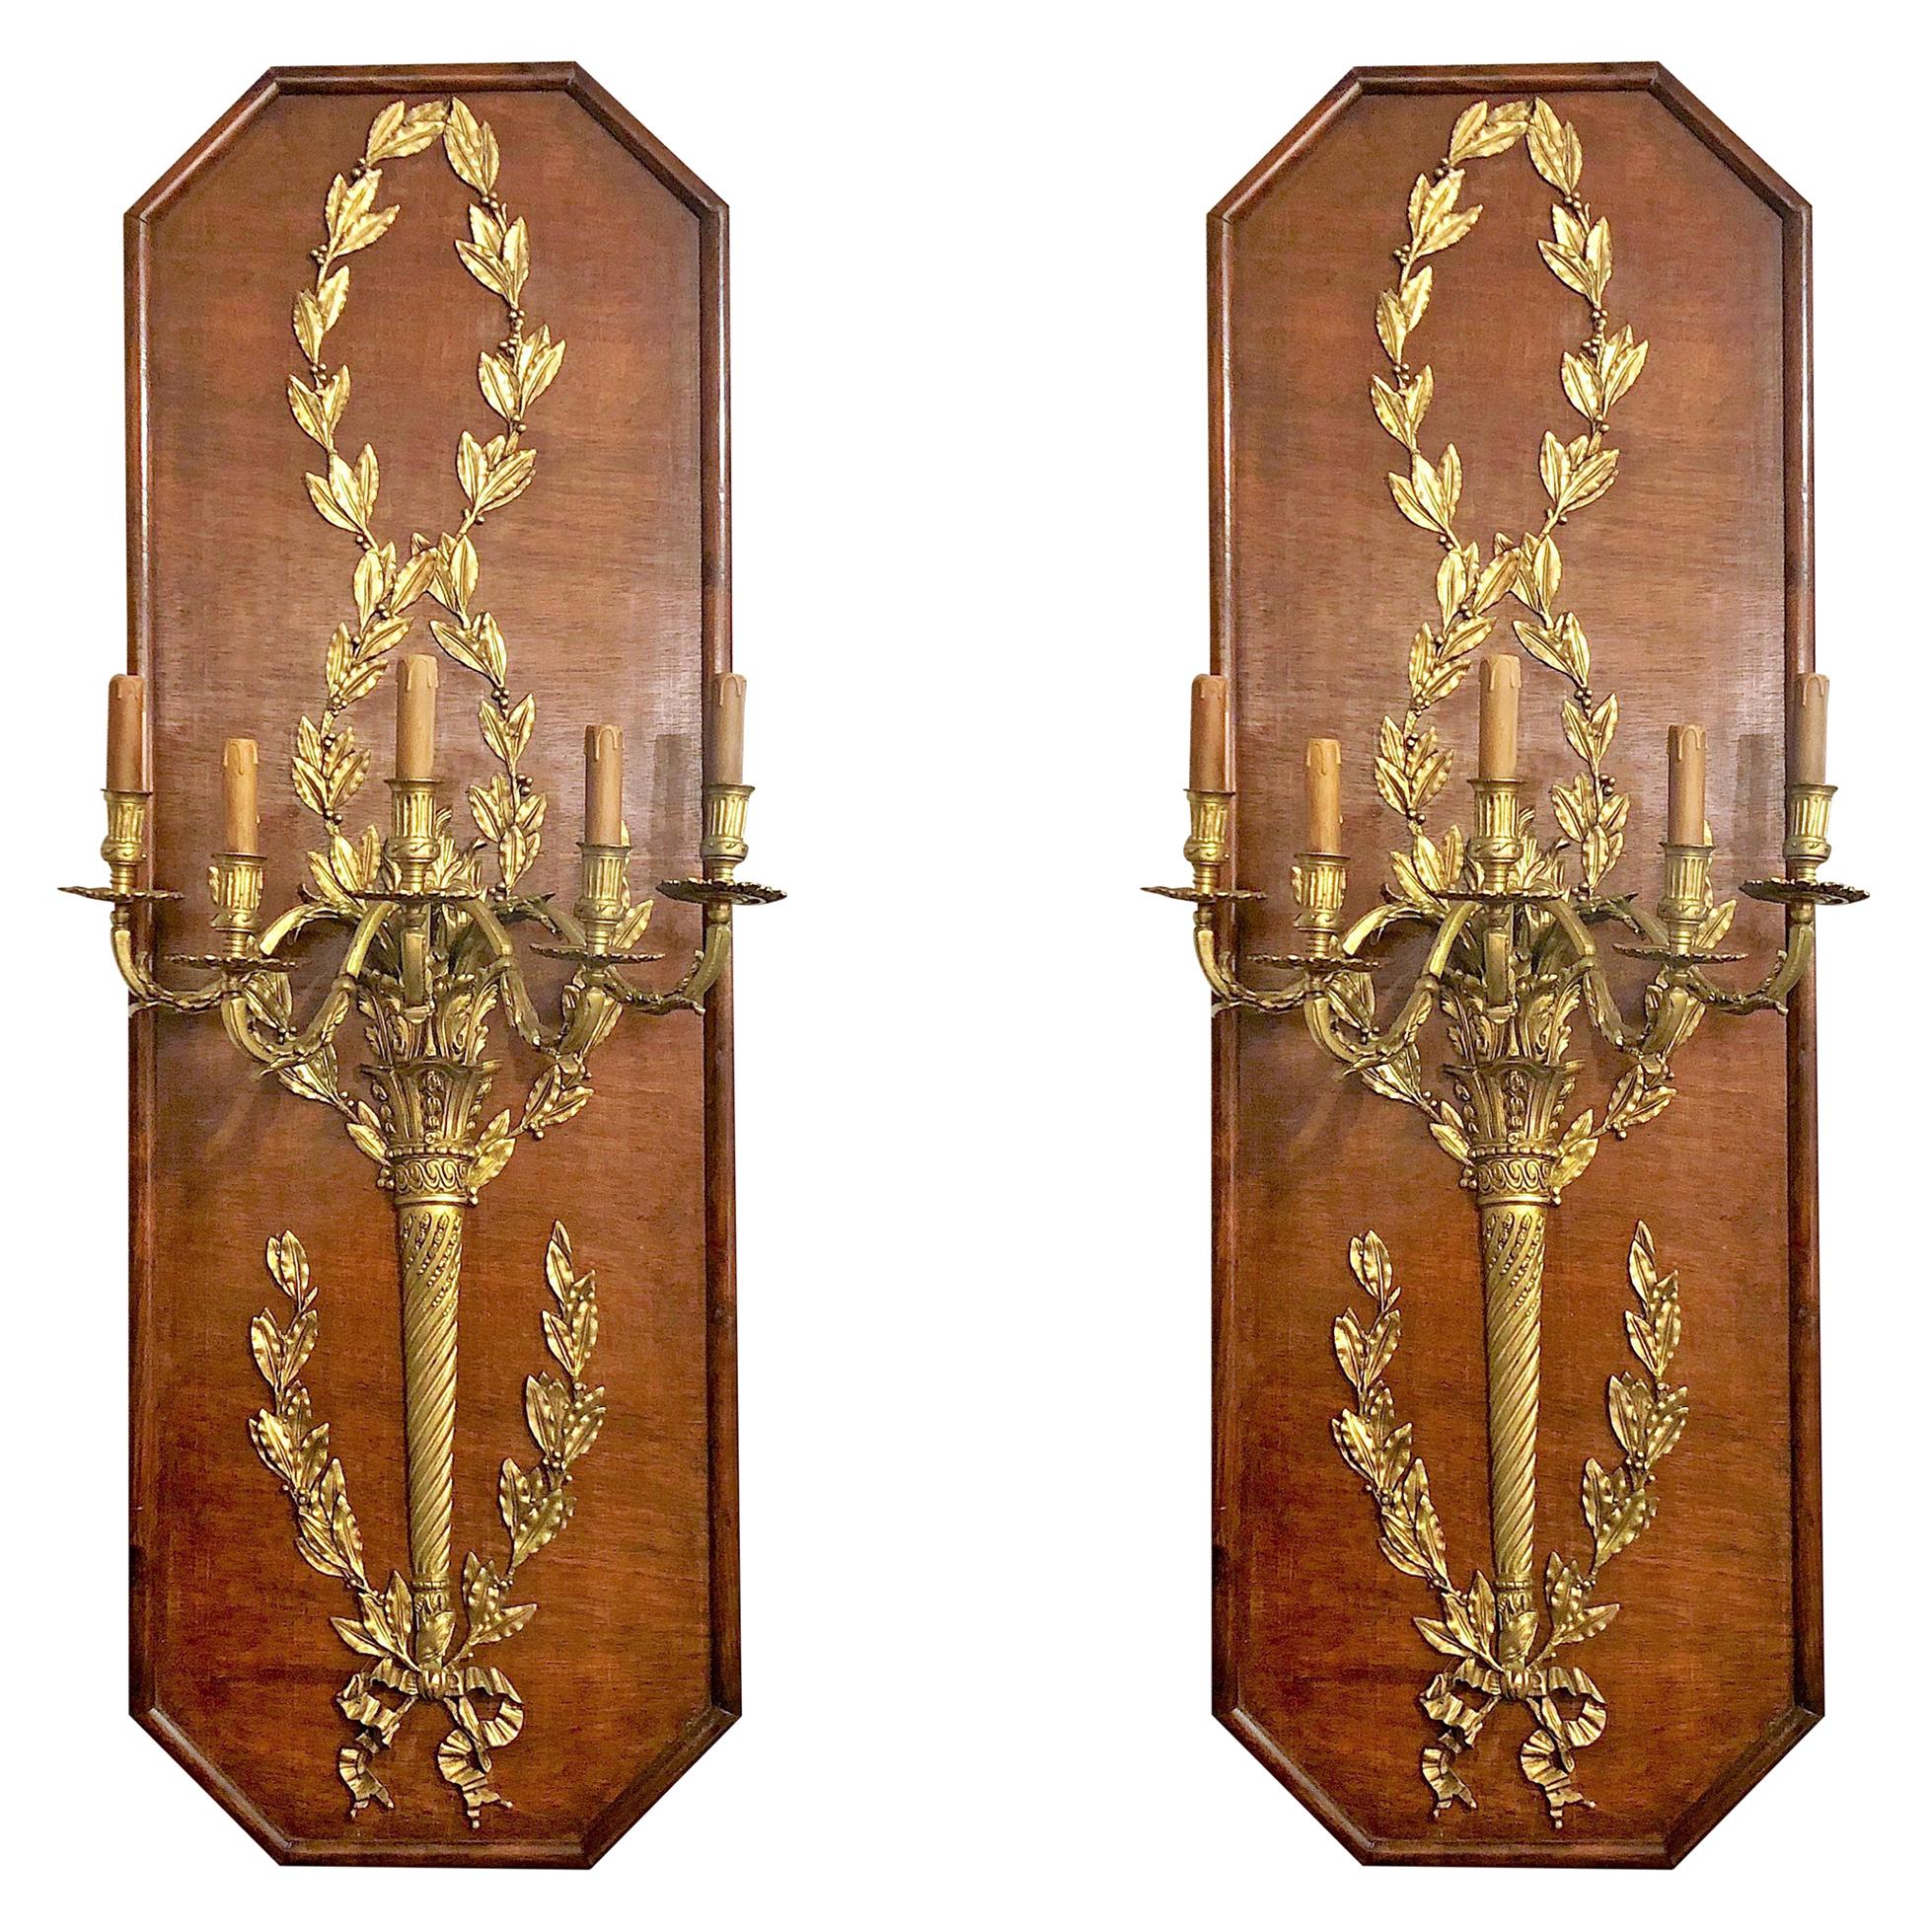 Pair of Antique French Wood Paneled Bronze D'ore Wall Sconces